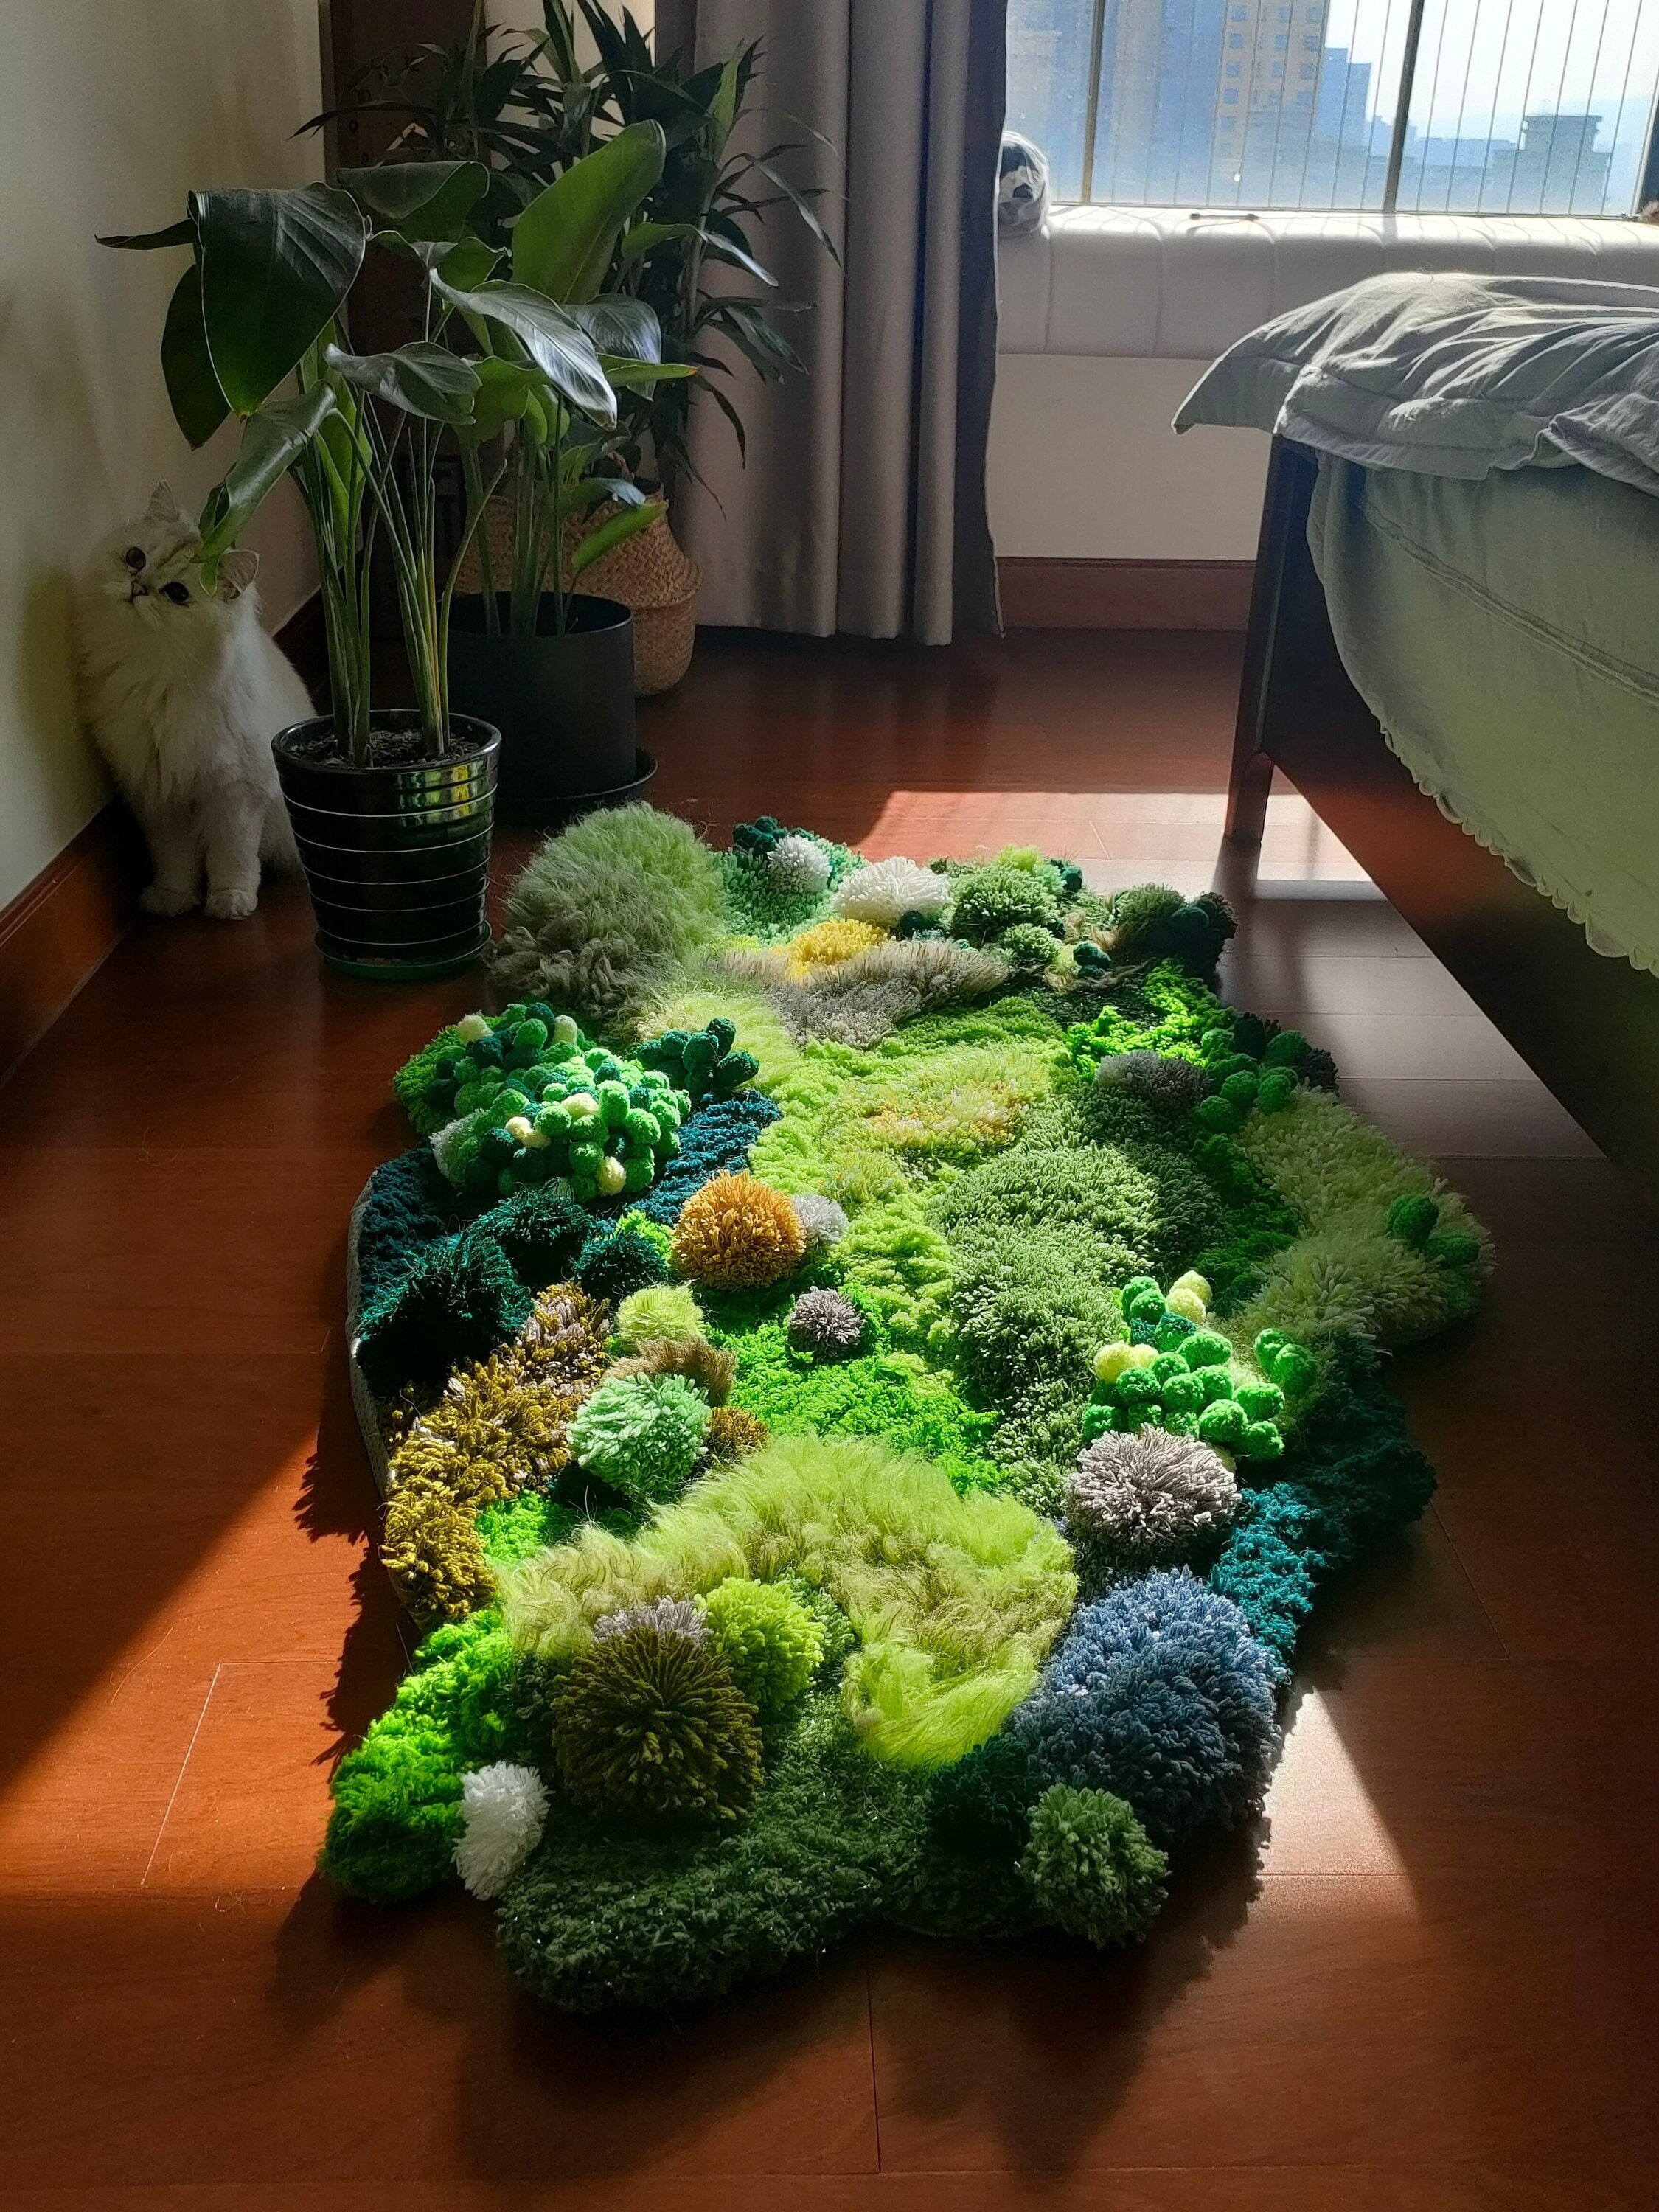 Unique Wool Rugs That Bring Moss And Meadows Into Your Home